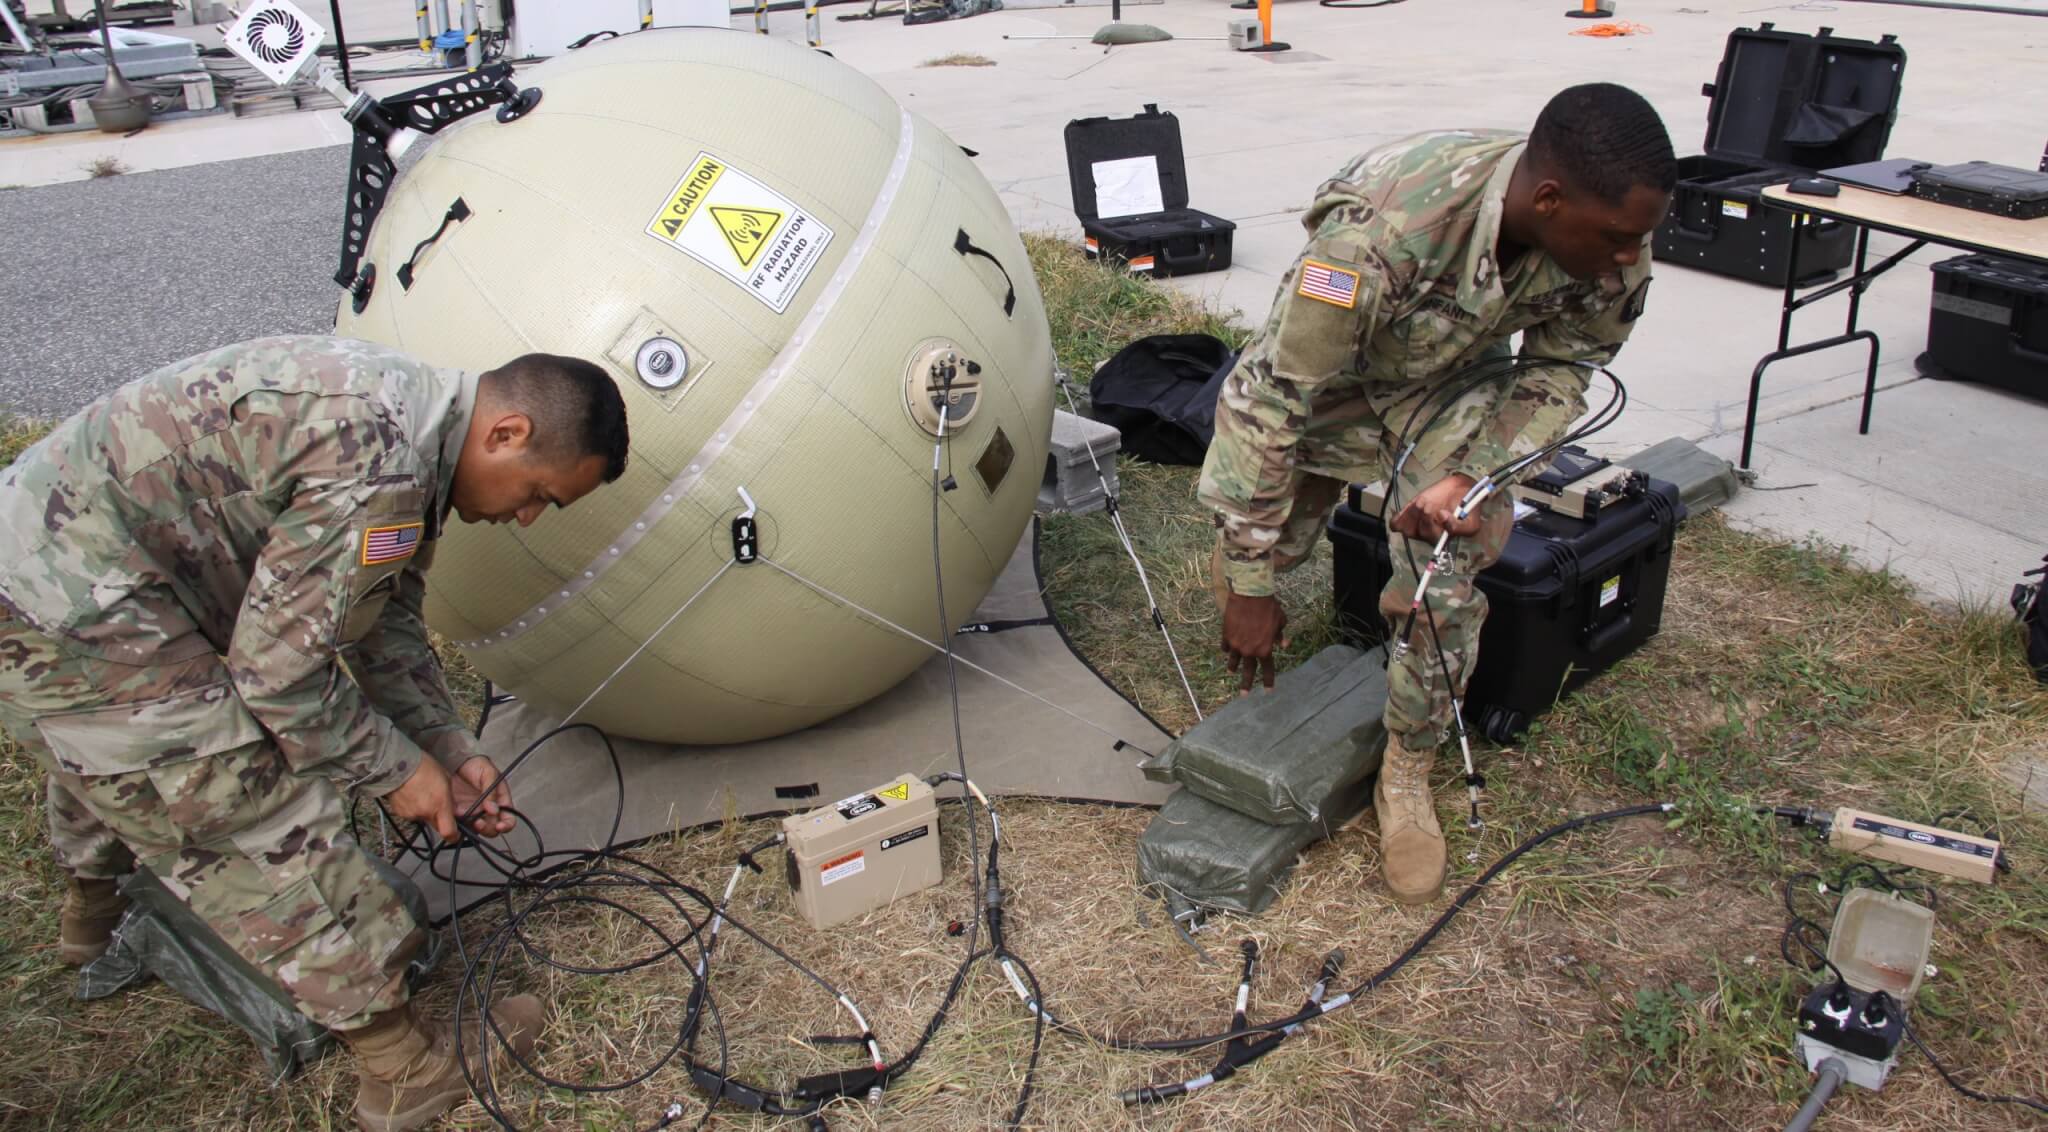 Staff Sgt. Pedro Garcia Bibian (left) and Spc. Christopher Bellanfant test the Transportable Tactical Command Communications-Lite system during Tactical Digital Media training at Aberdeen Proving
Ground, Maryland. Army photo by Dan Lafontaine, PEO C3T Public Affairs.